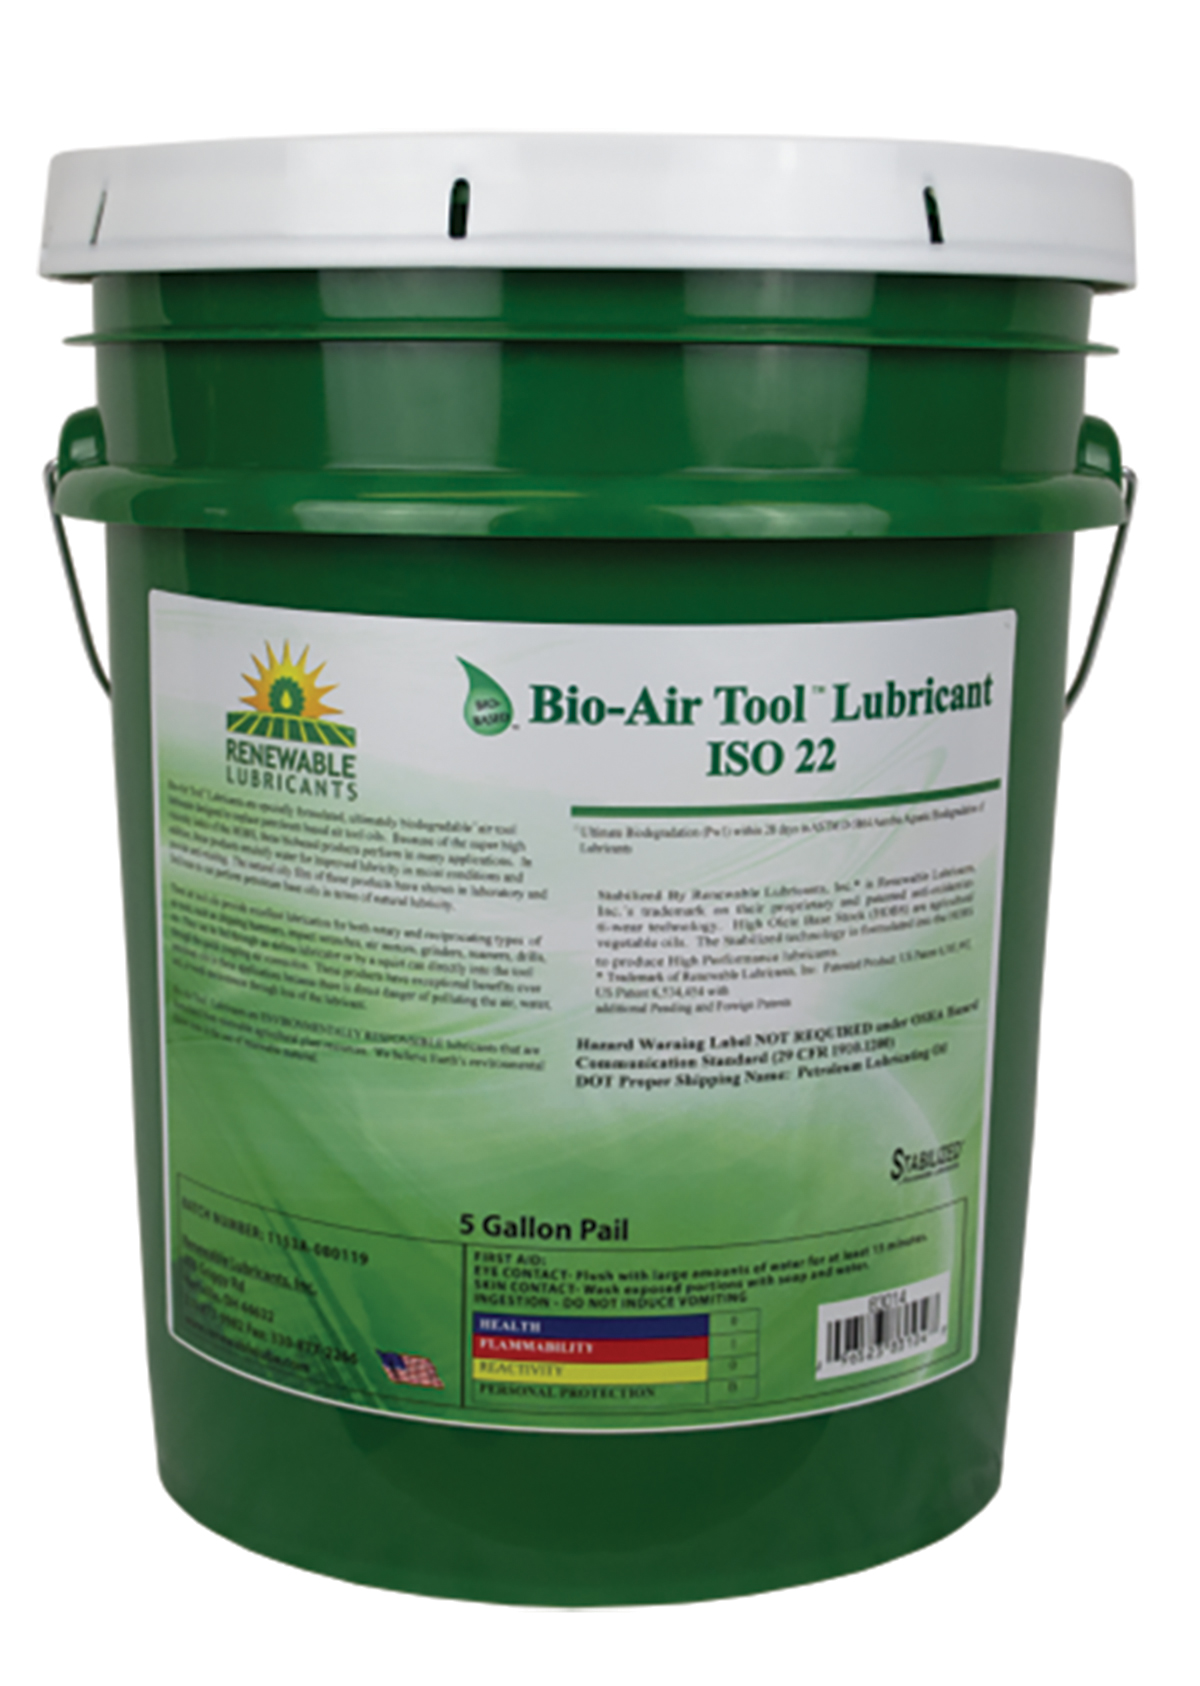 Bio-Air Tool Lubricants are environmentally friendly and safer for employees than petroleum-based oils. 